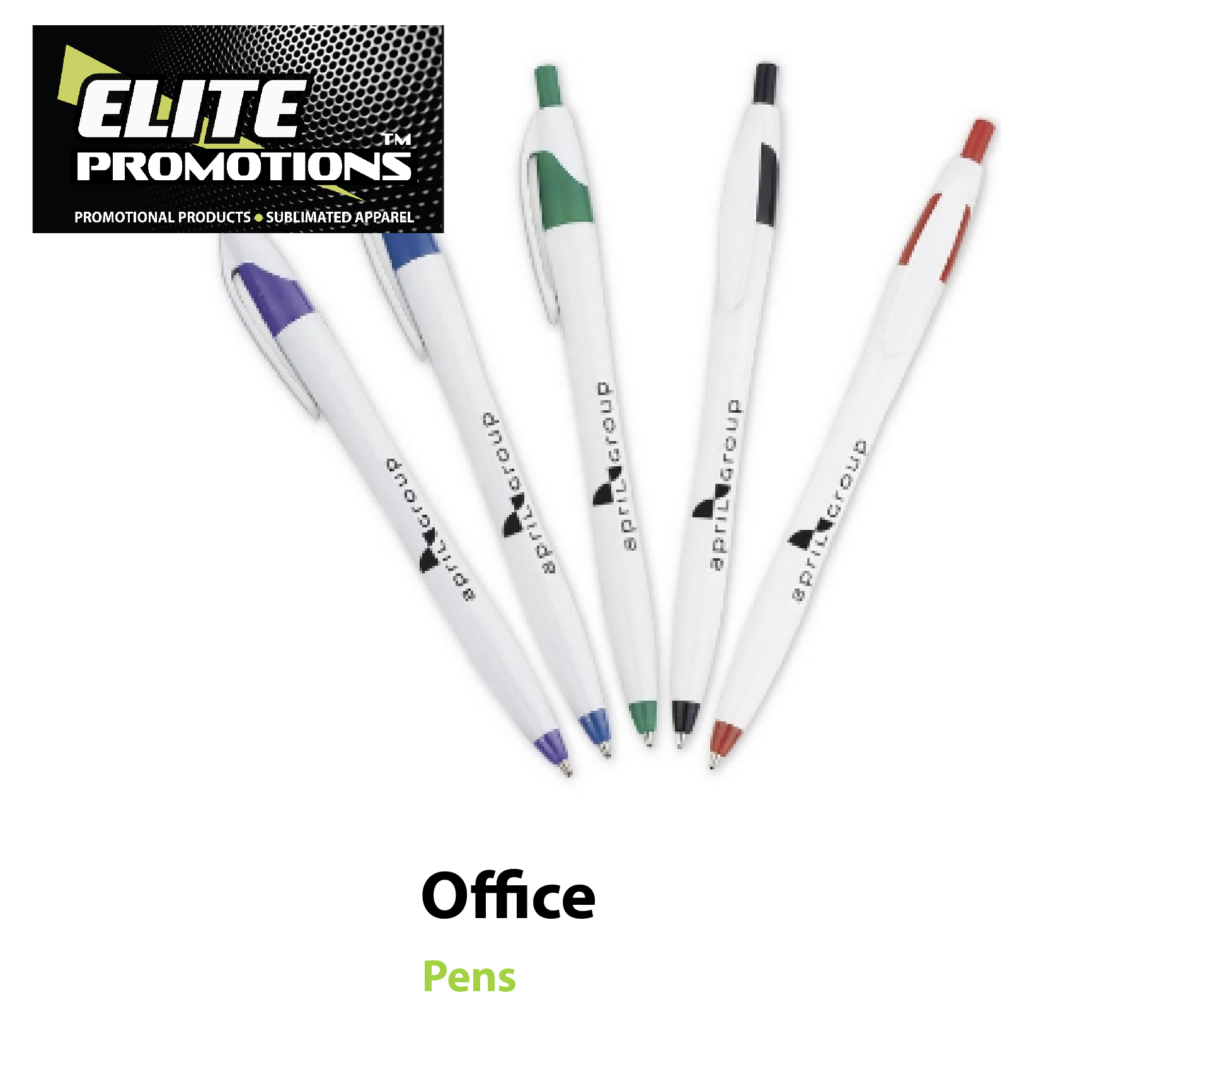 A group of pens that are all different colors.